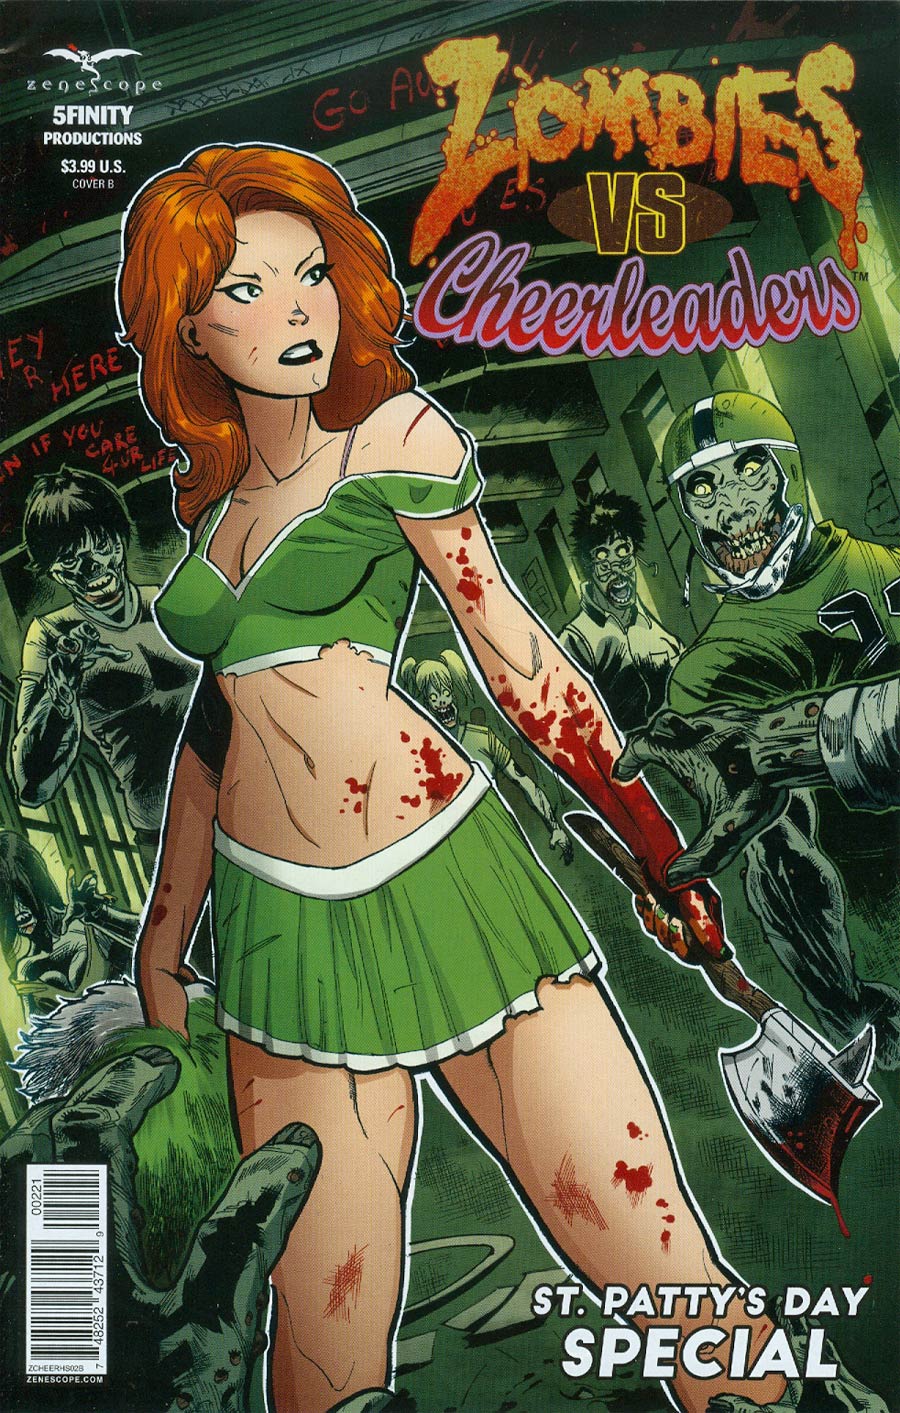 Zombies vs Cheerleaders 2015 St Pattys Day Special Cover B Andrea Errico